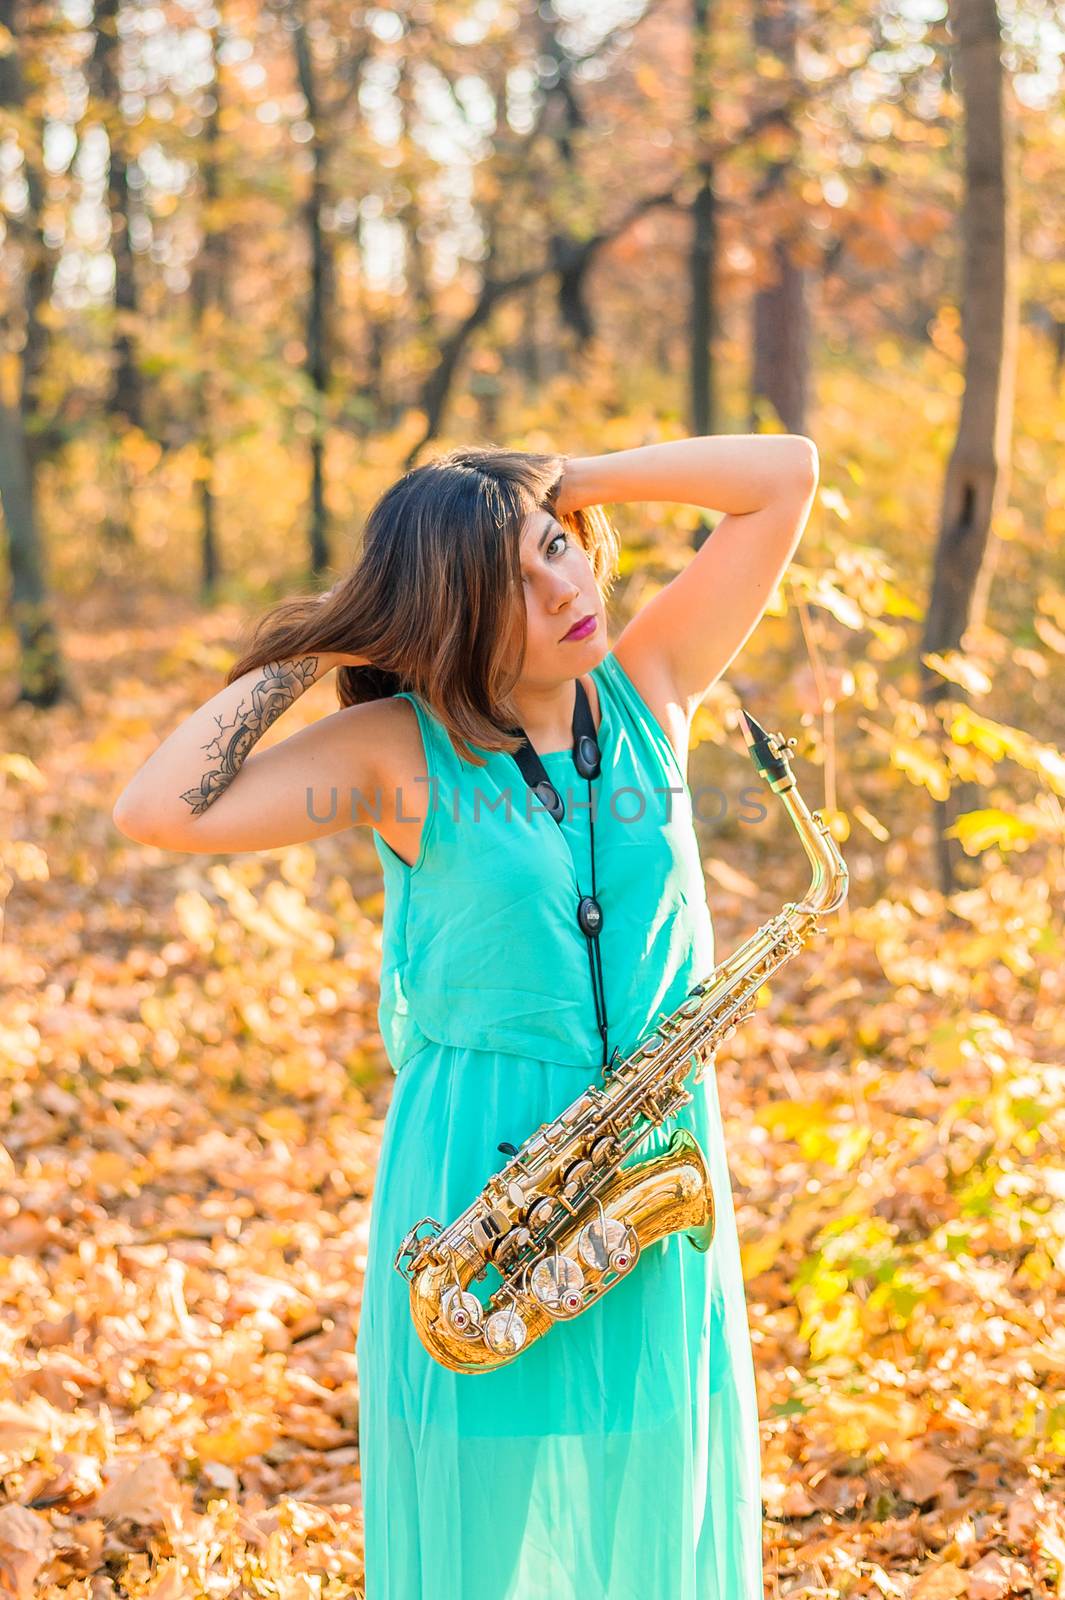 lovely brunette girl in a long blue dress and alto saxophone posing in a yellow autumn park, raising hands to head